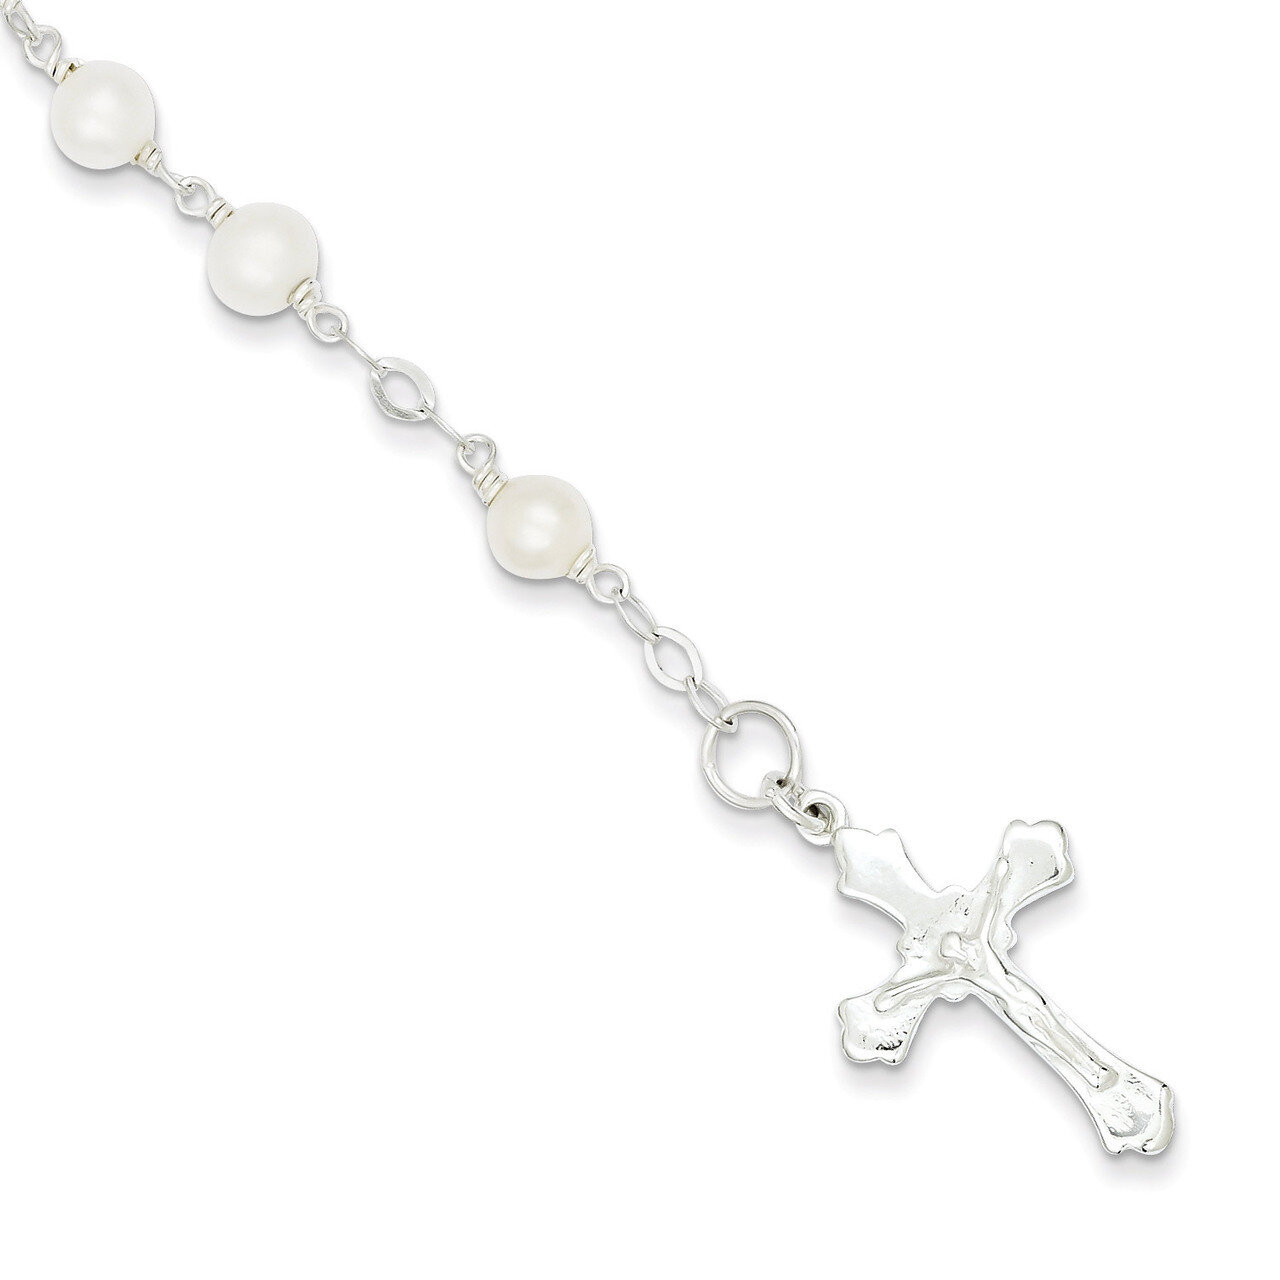 7.5 Inch Cultured Pearl Rosary Bracelet Sterling Silver QH4698-7.5